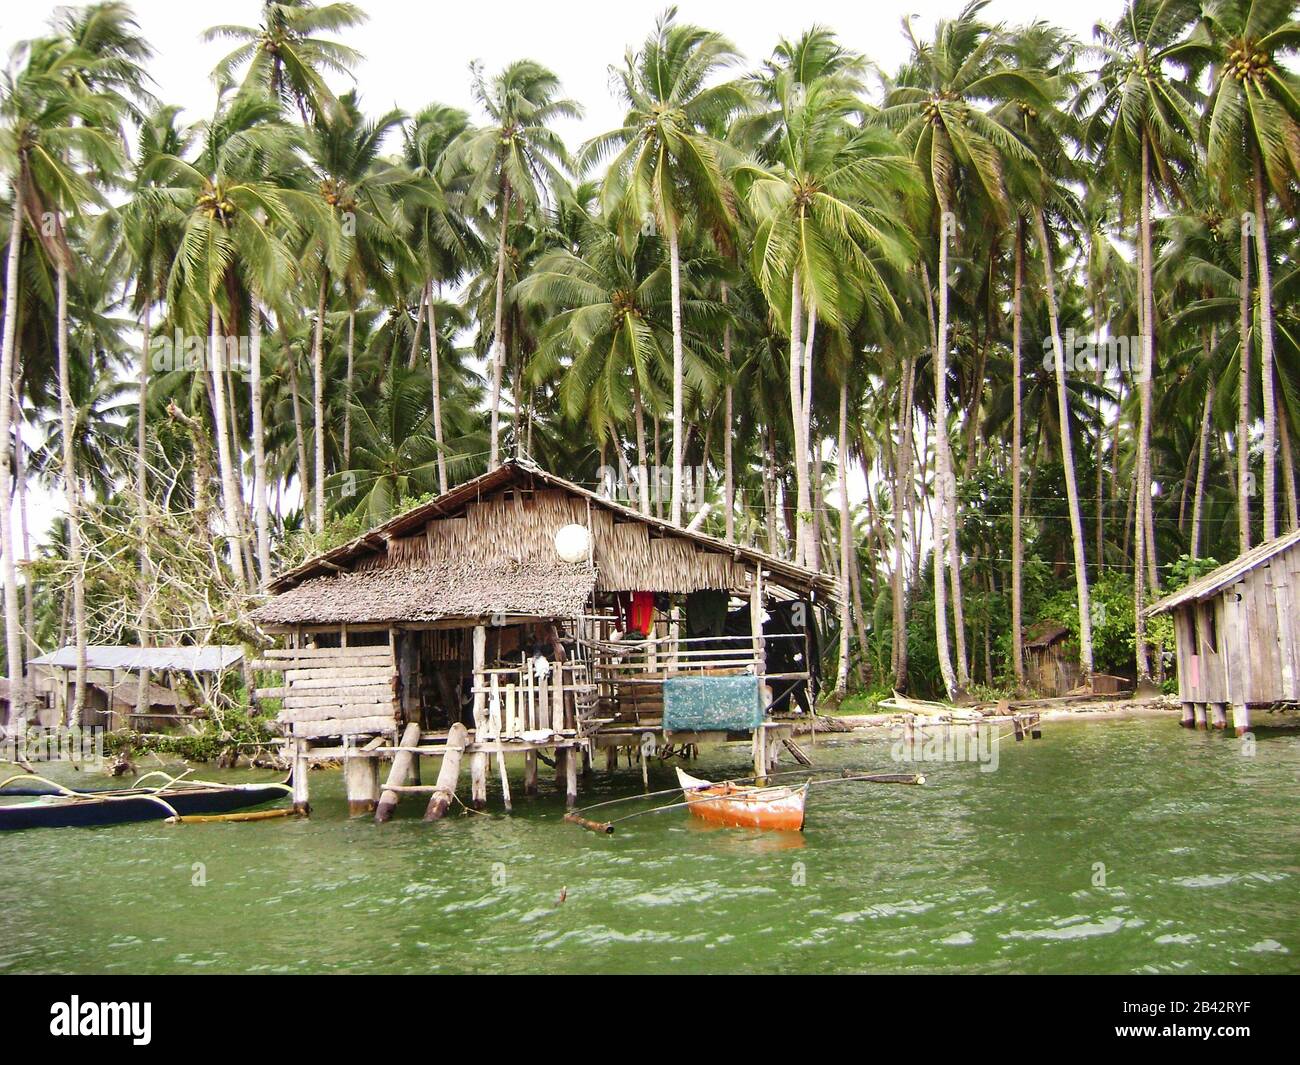 Medium wide shot of a house on stilts with boats in front in a fishing village in Surigao del Sur, Philippines Stock Photo